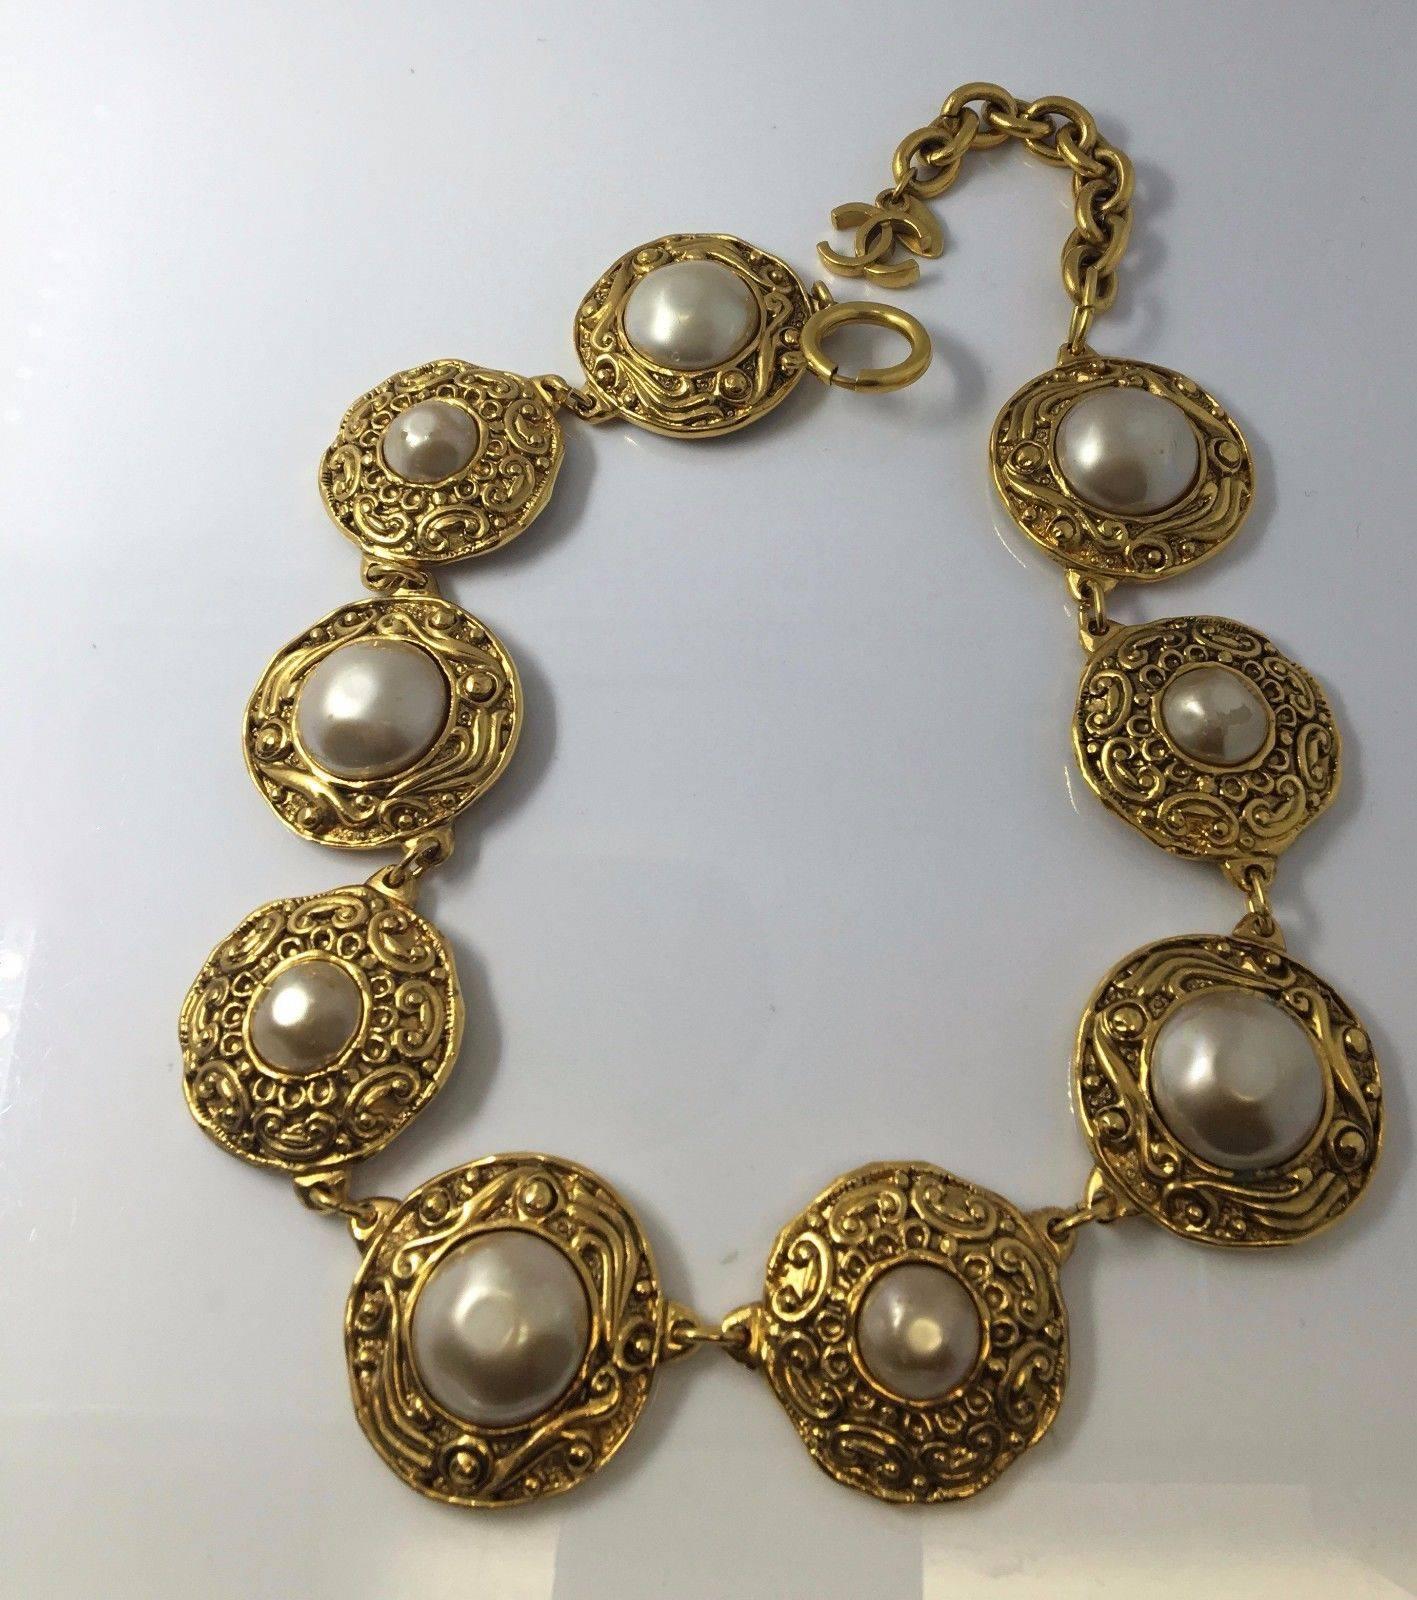 Stunning chain-like necklace with big round gold plates and faux pearls in varying sizes
Signed by Chanel
Made in France
Double C logo hanging in back from clasp
